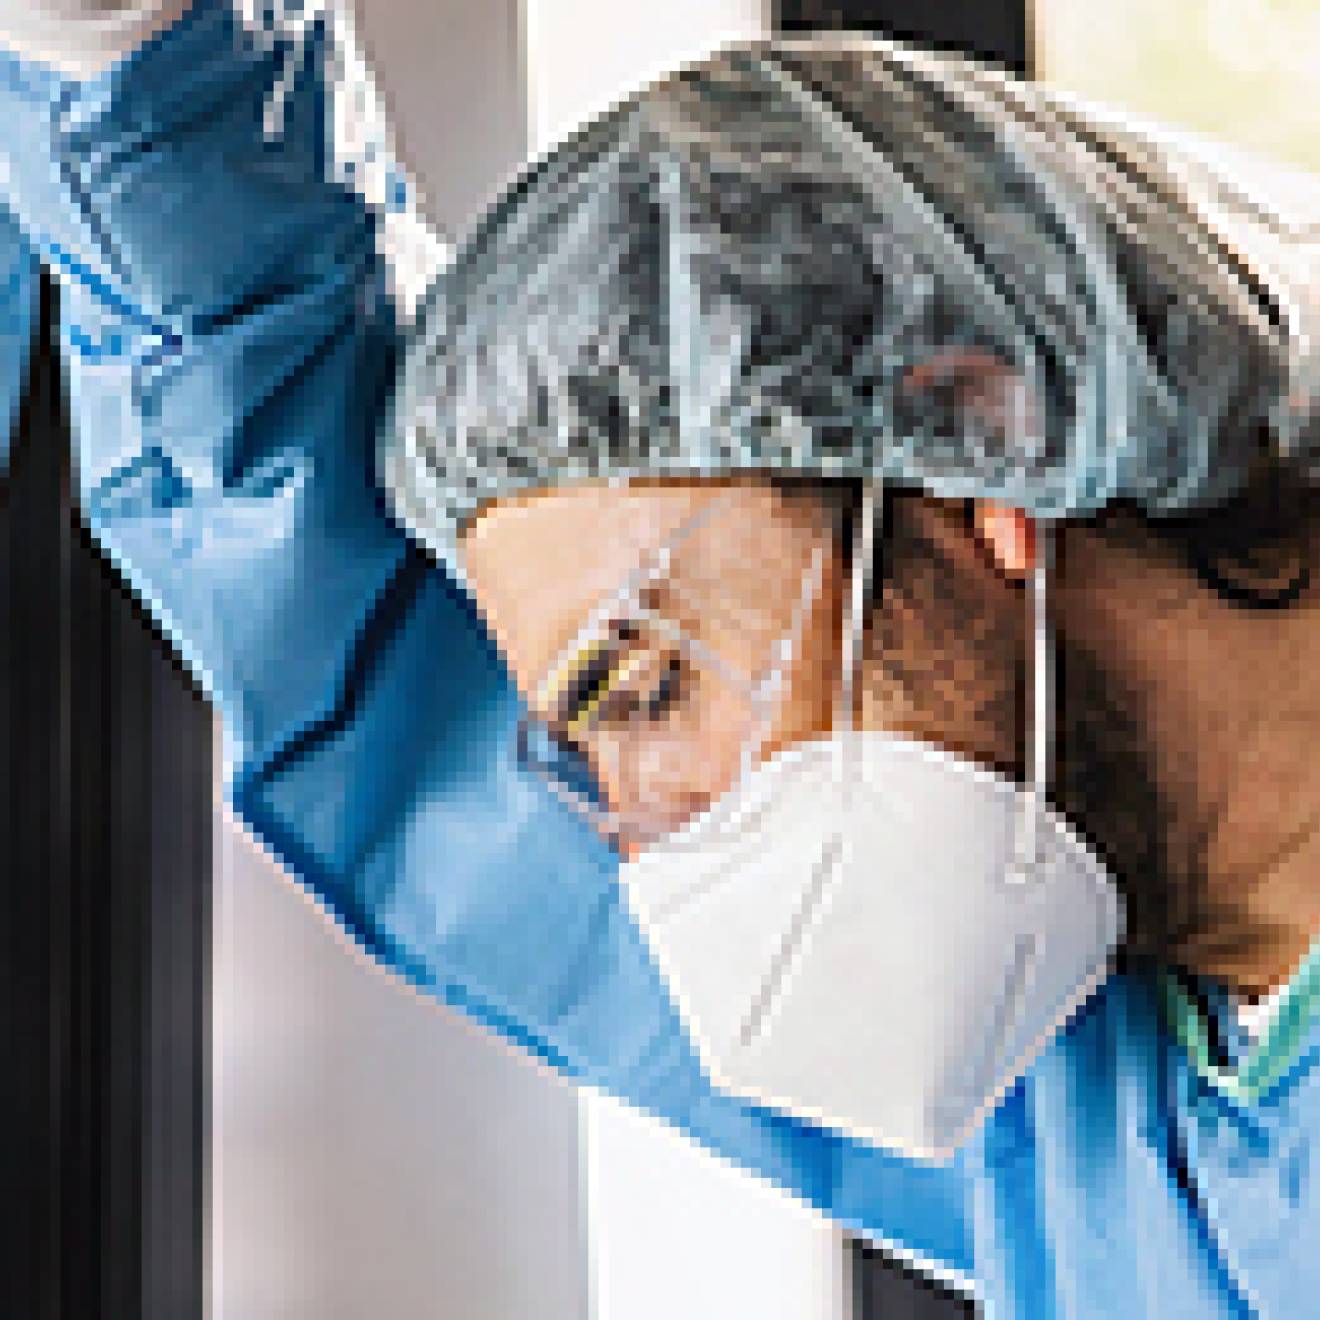 A man in scrubs, a hairnet and a face mask leans against a window